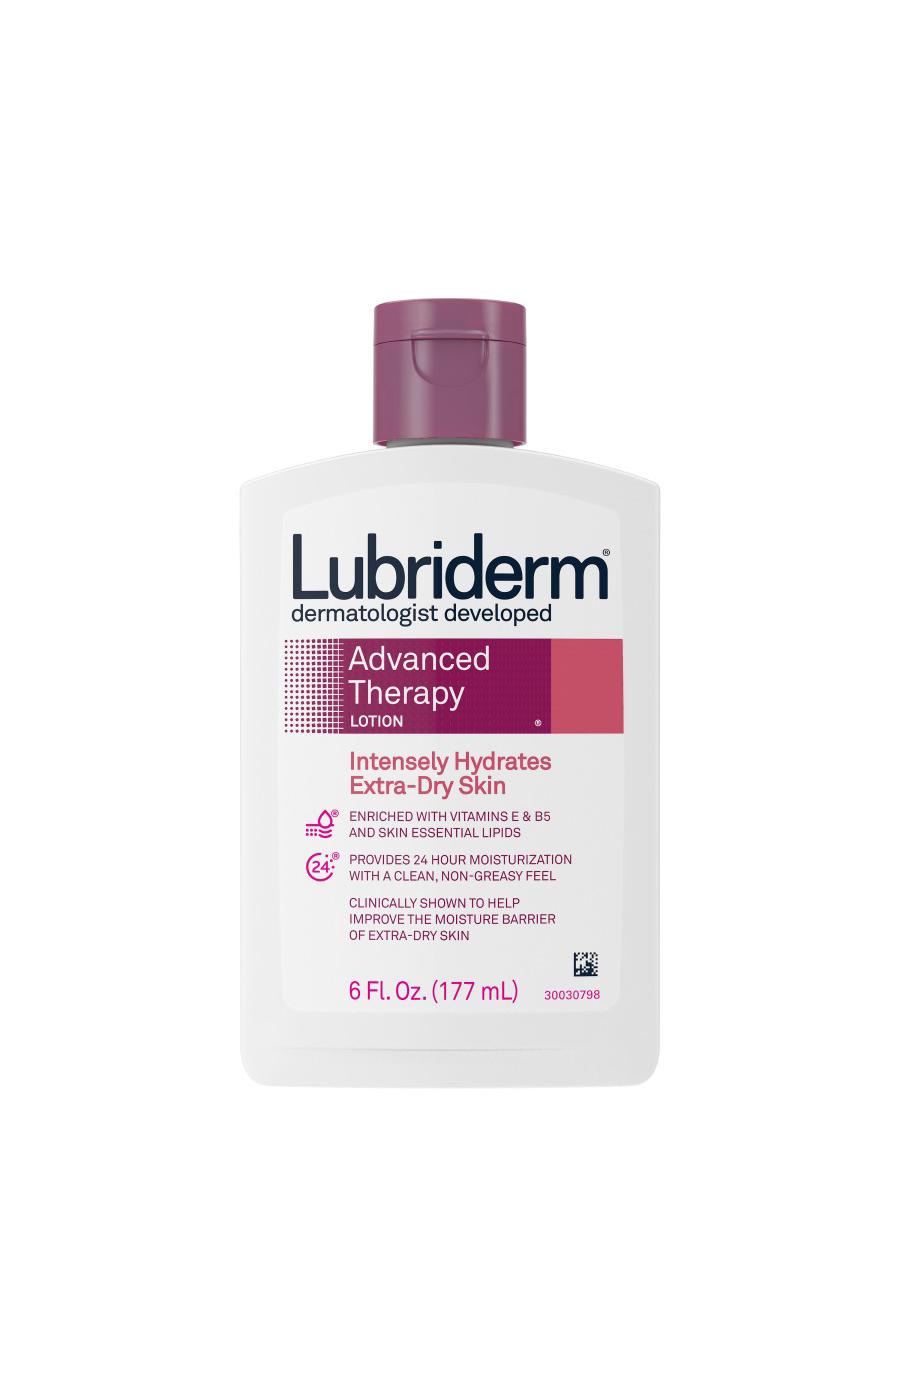 Lubriderm Advanced Therapy Lotion; image 1 of 4